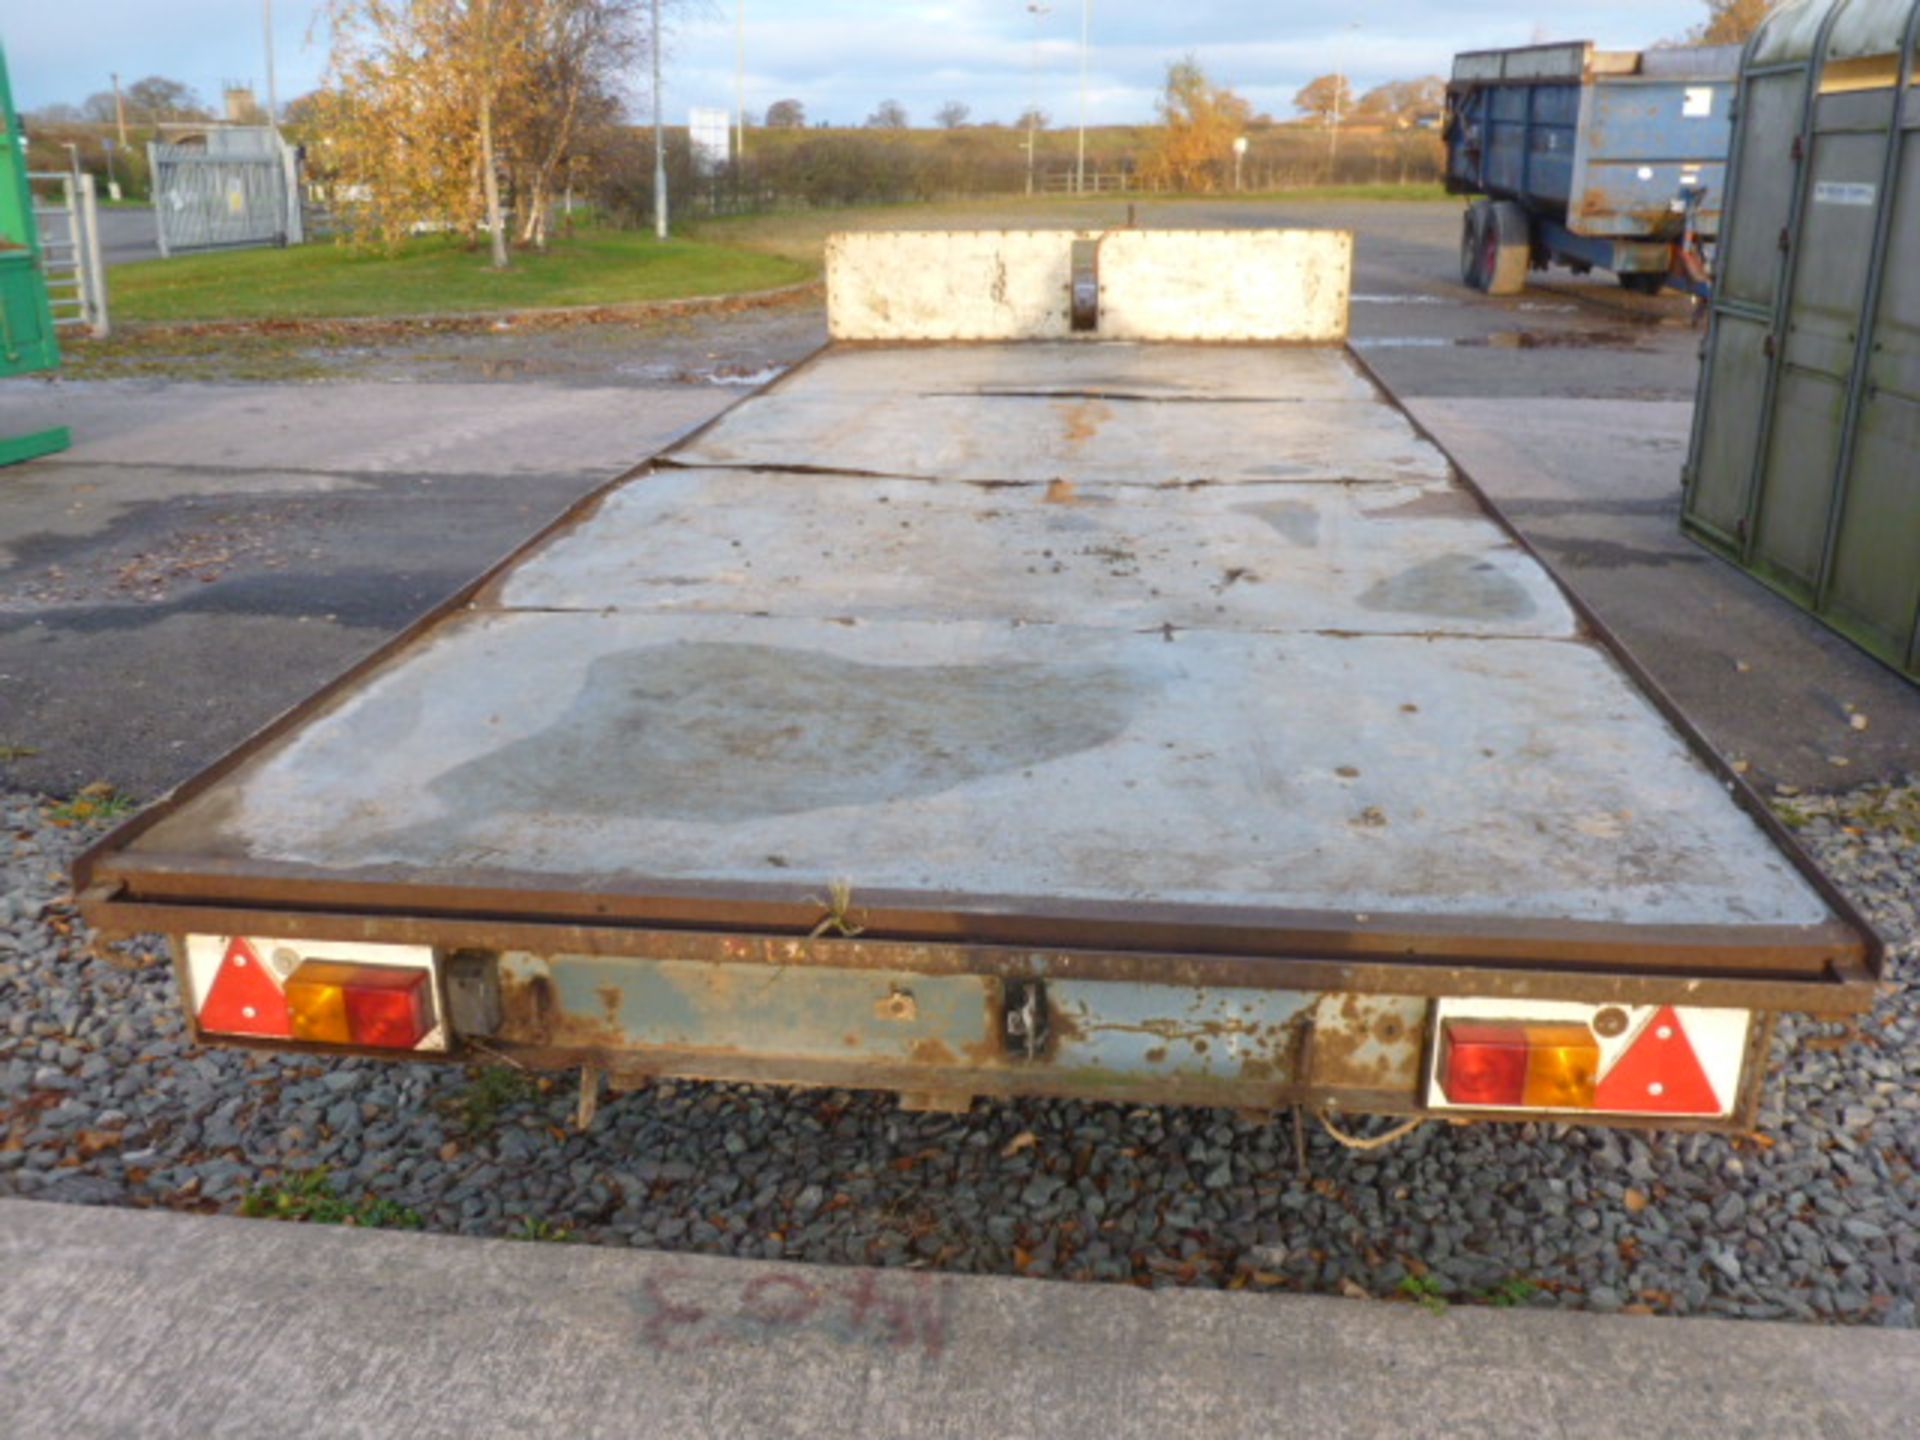 14' WILLIAMS FLAT BED TRAILER (WELL USED - Image 2 of 2